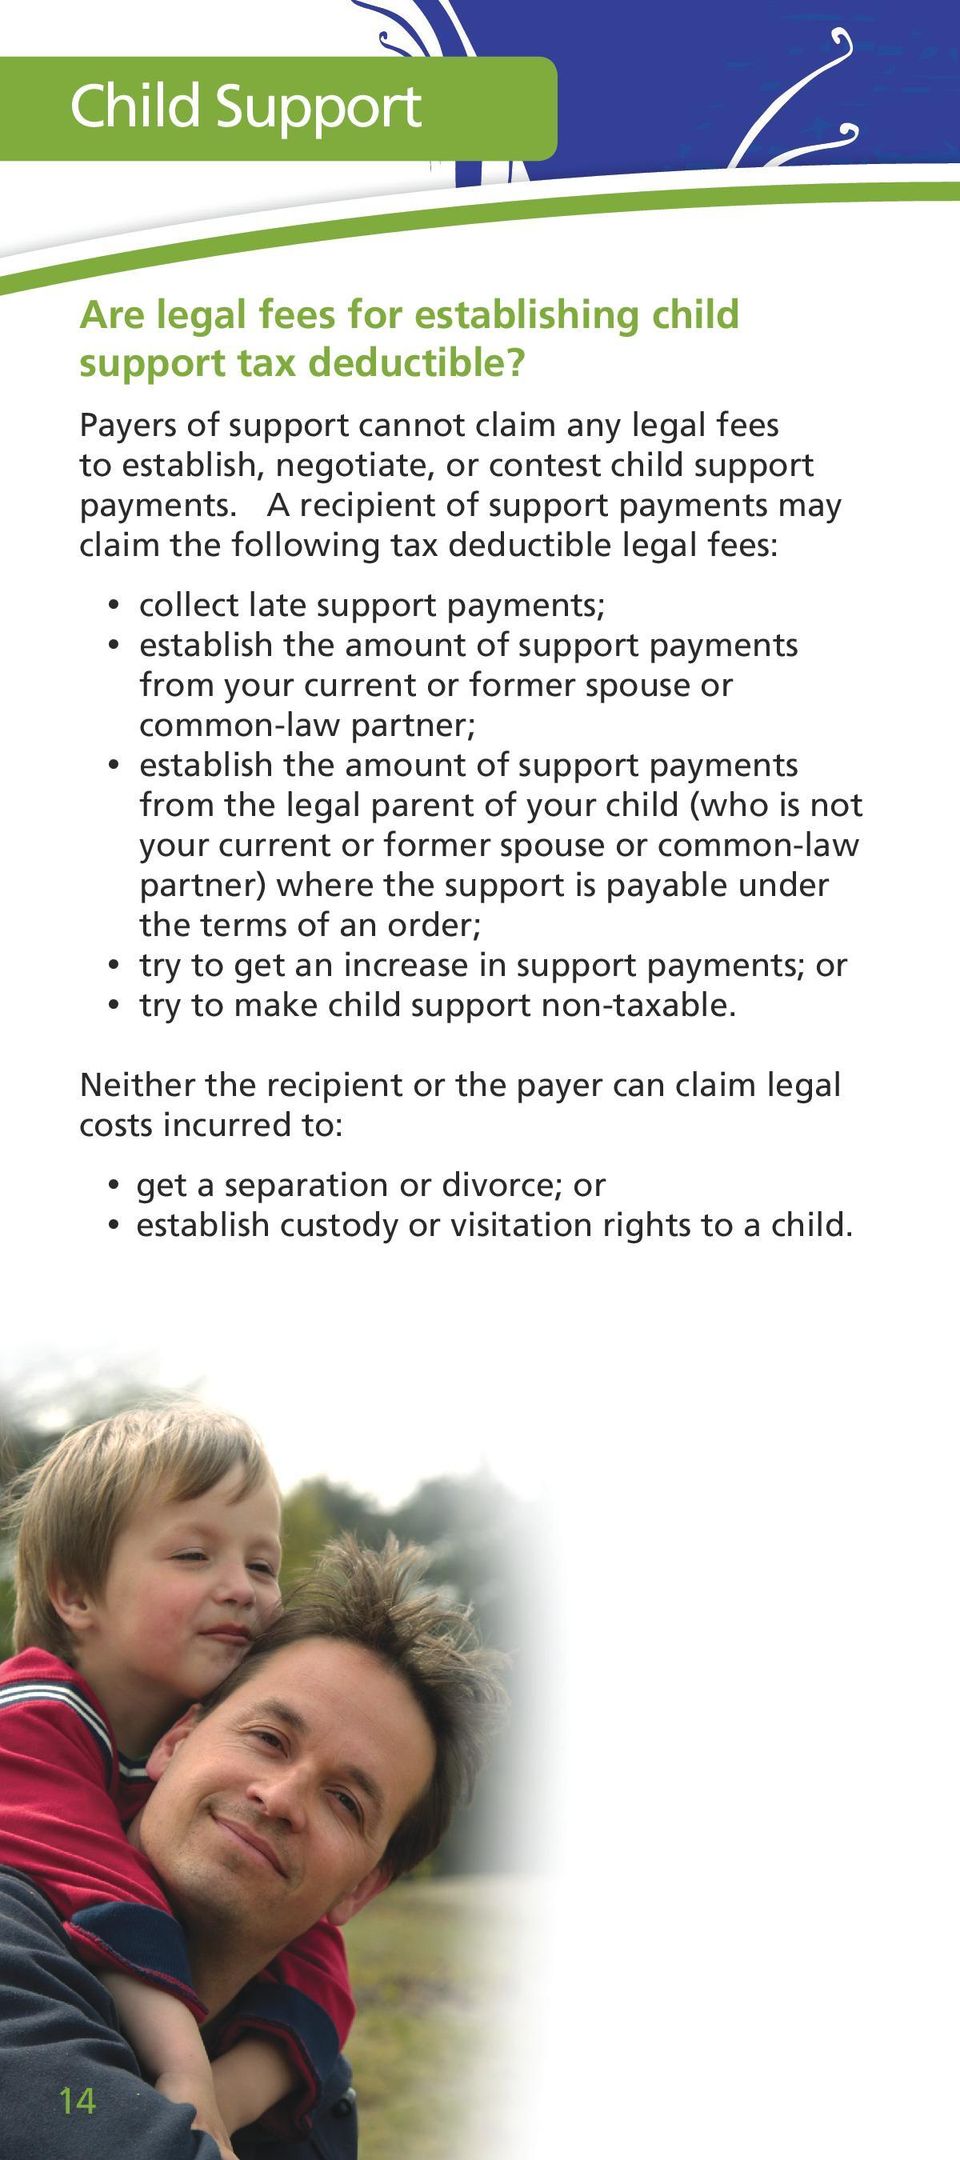 common-law partner; establish the amount of support payments from the legal parent of your child (who is not your current or former spouse or common-law partner) where the support is payable under